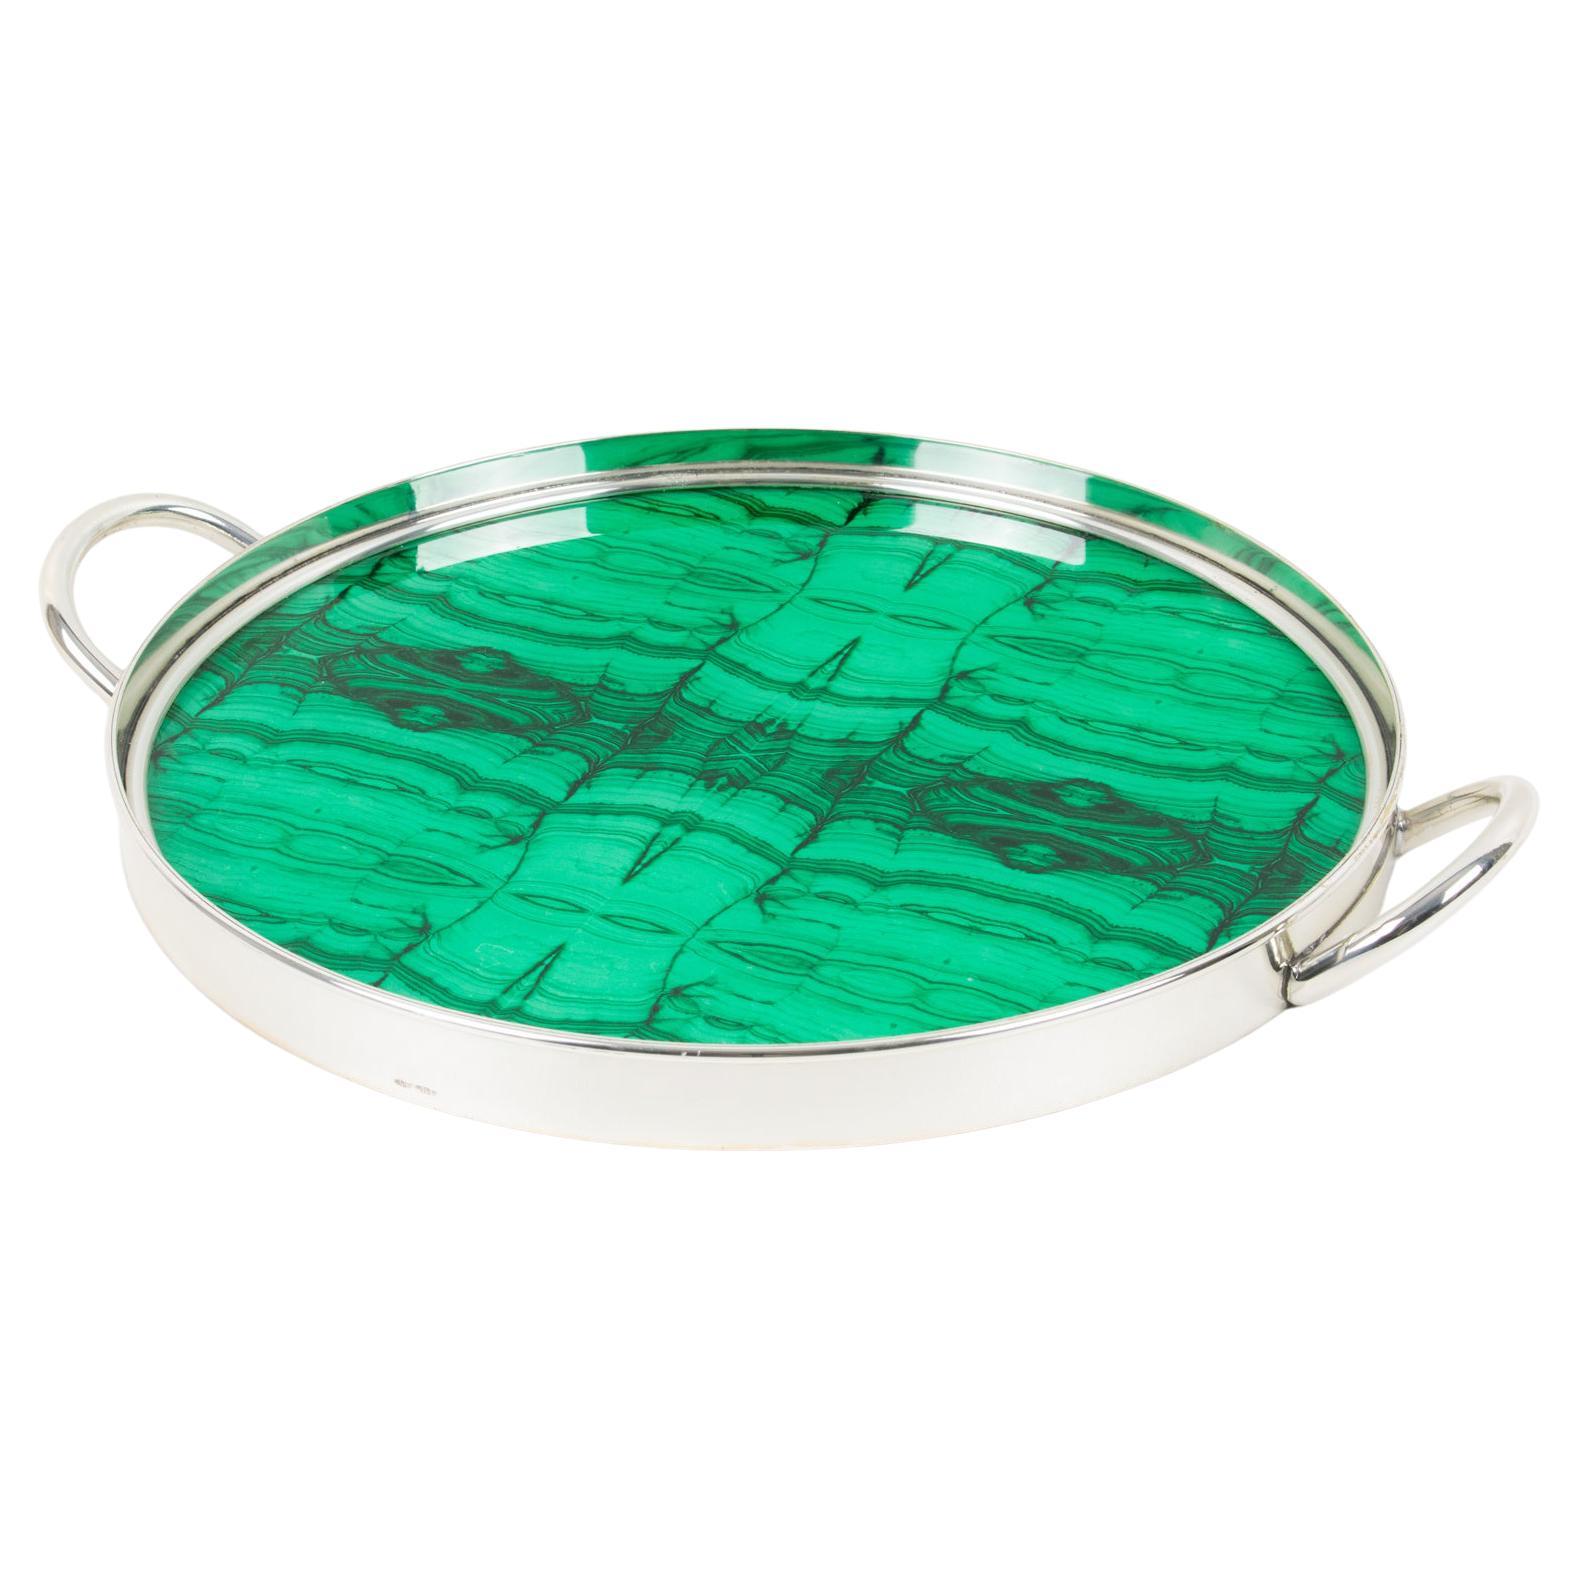 1970s Italian Modernist Silver Plate and Malachite-like Serving Tray